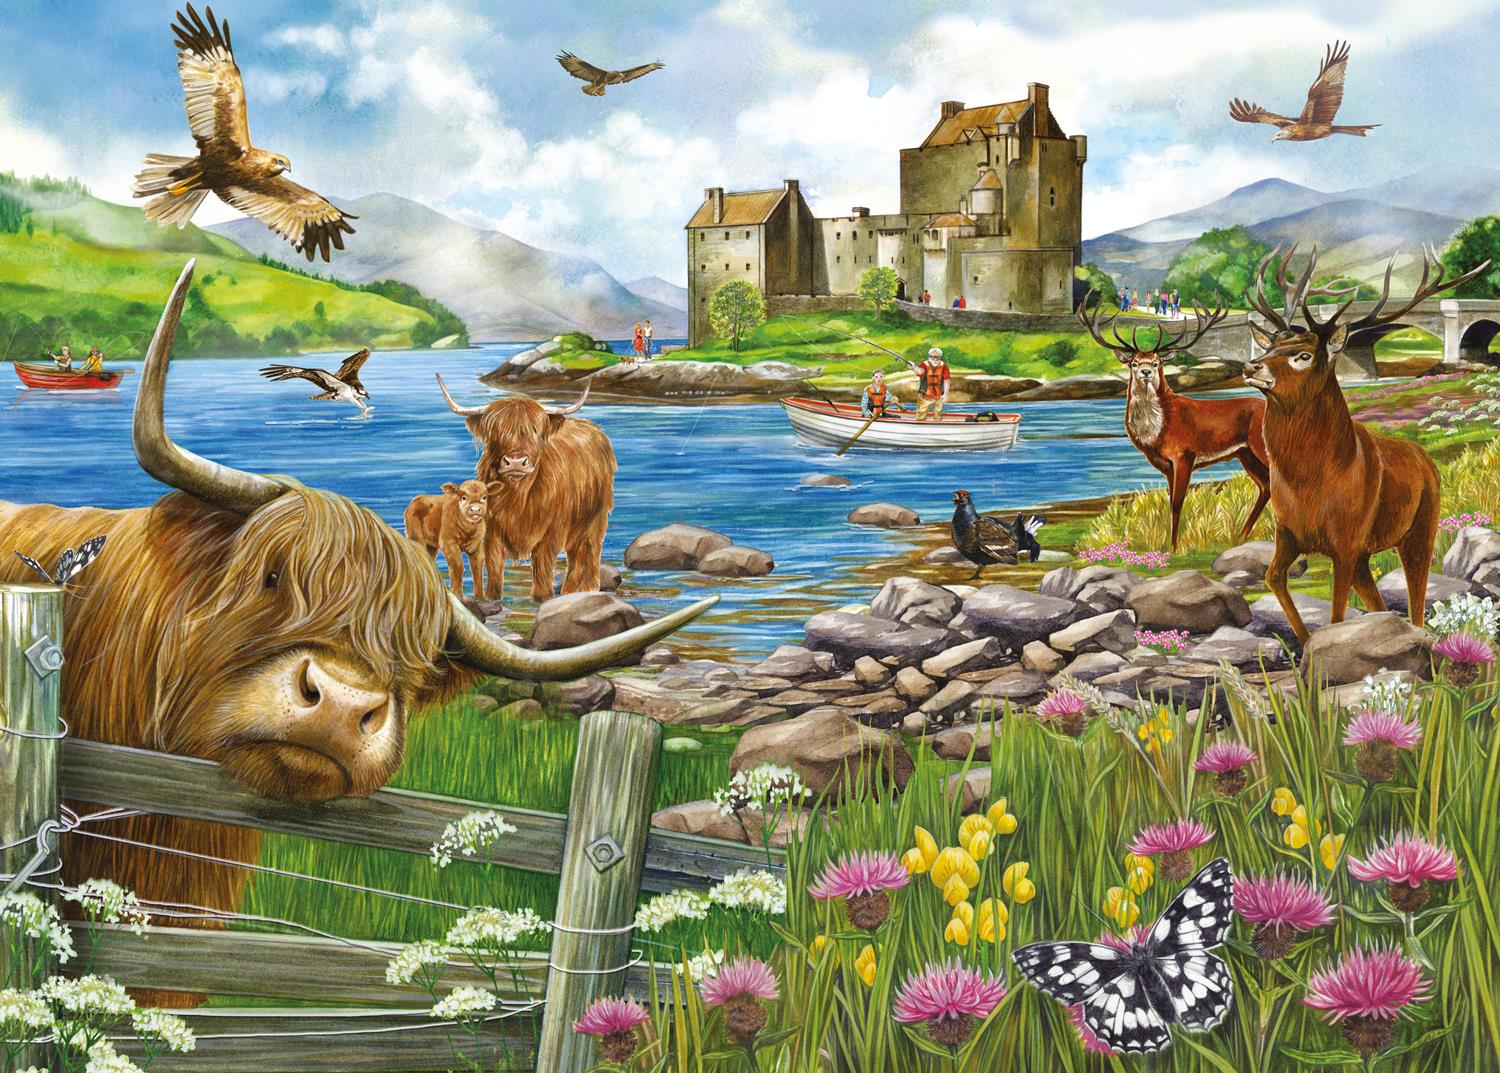 Otter House The Highlands Jigsaw Puzzle (1000 Pieces)